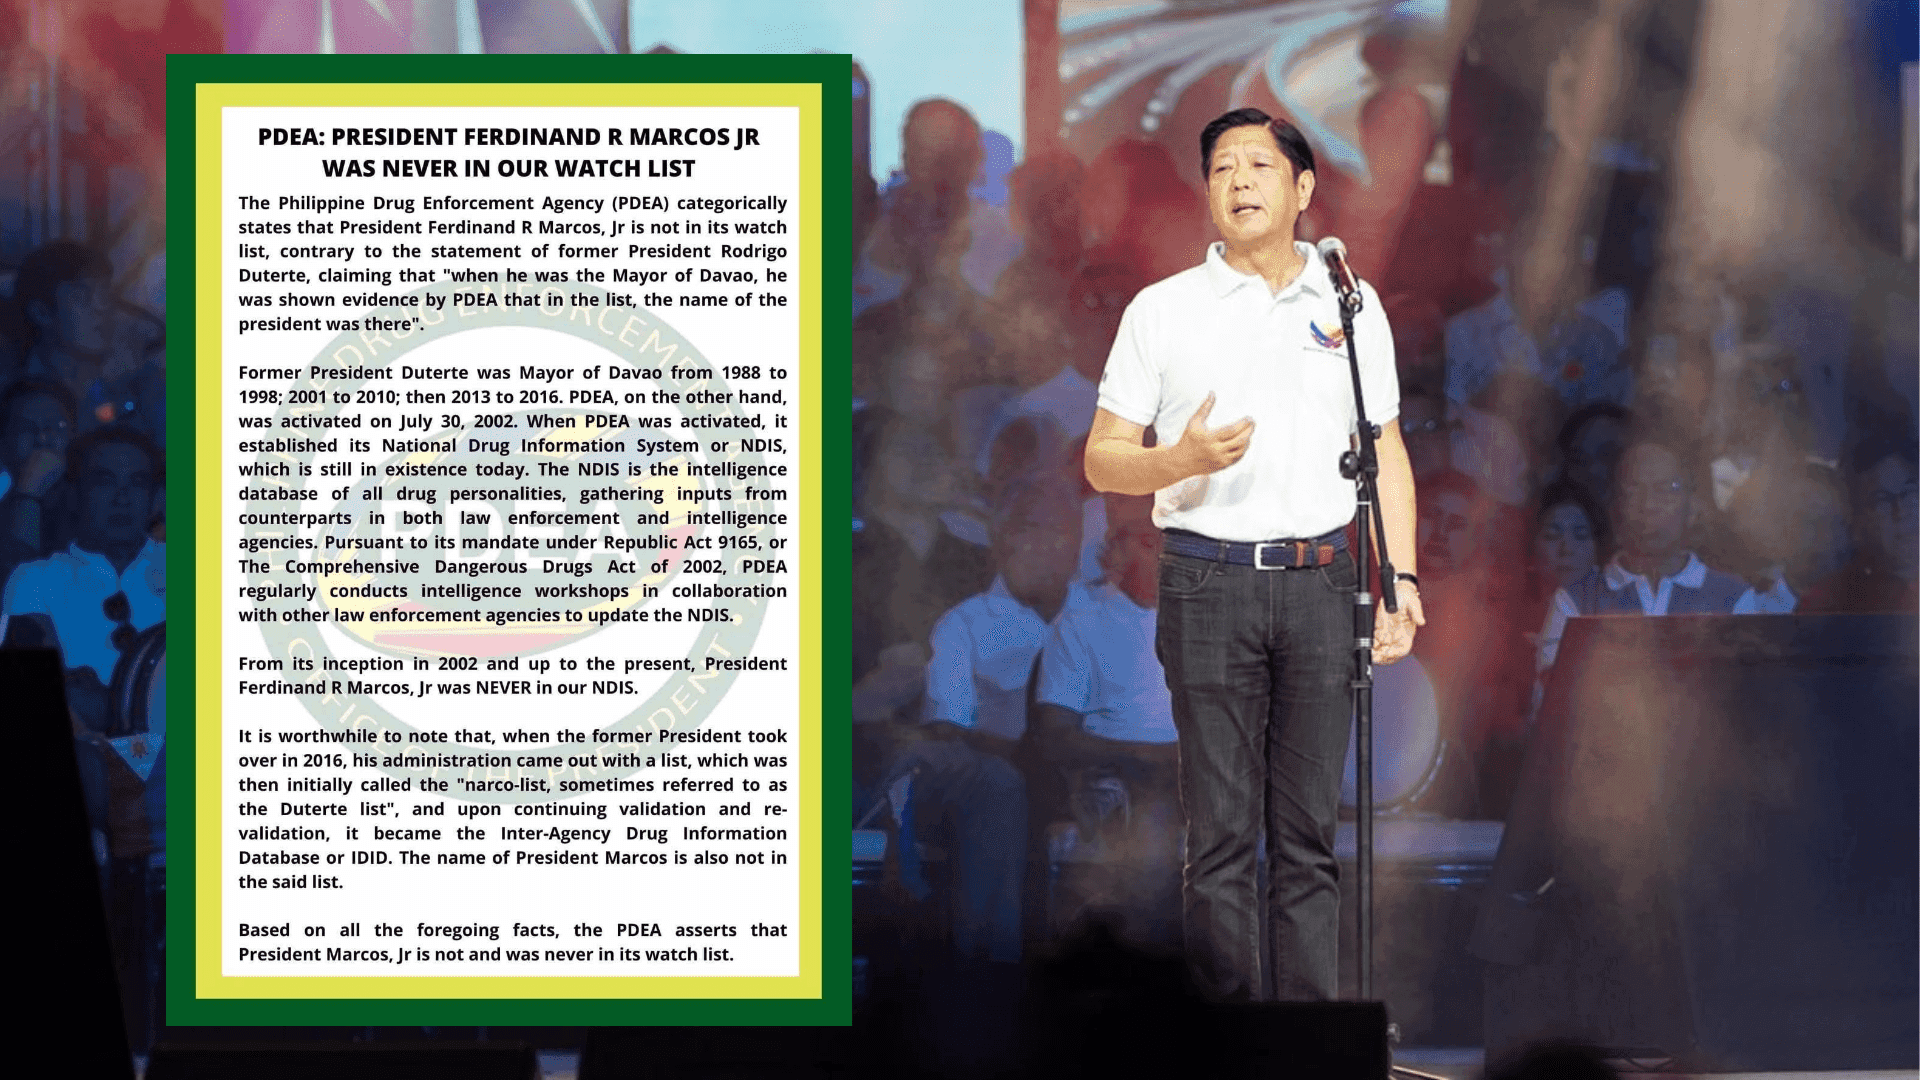 PDEA falsifies Duterte's allegation that Marcos is included in drug watch list